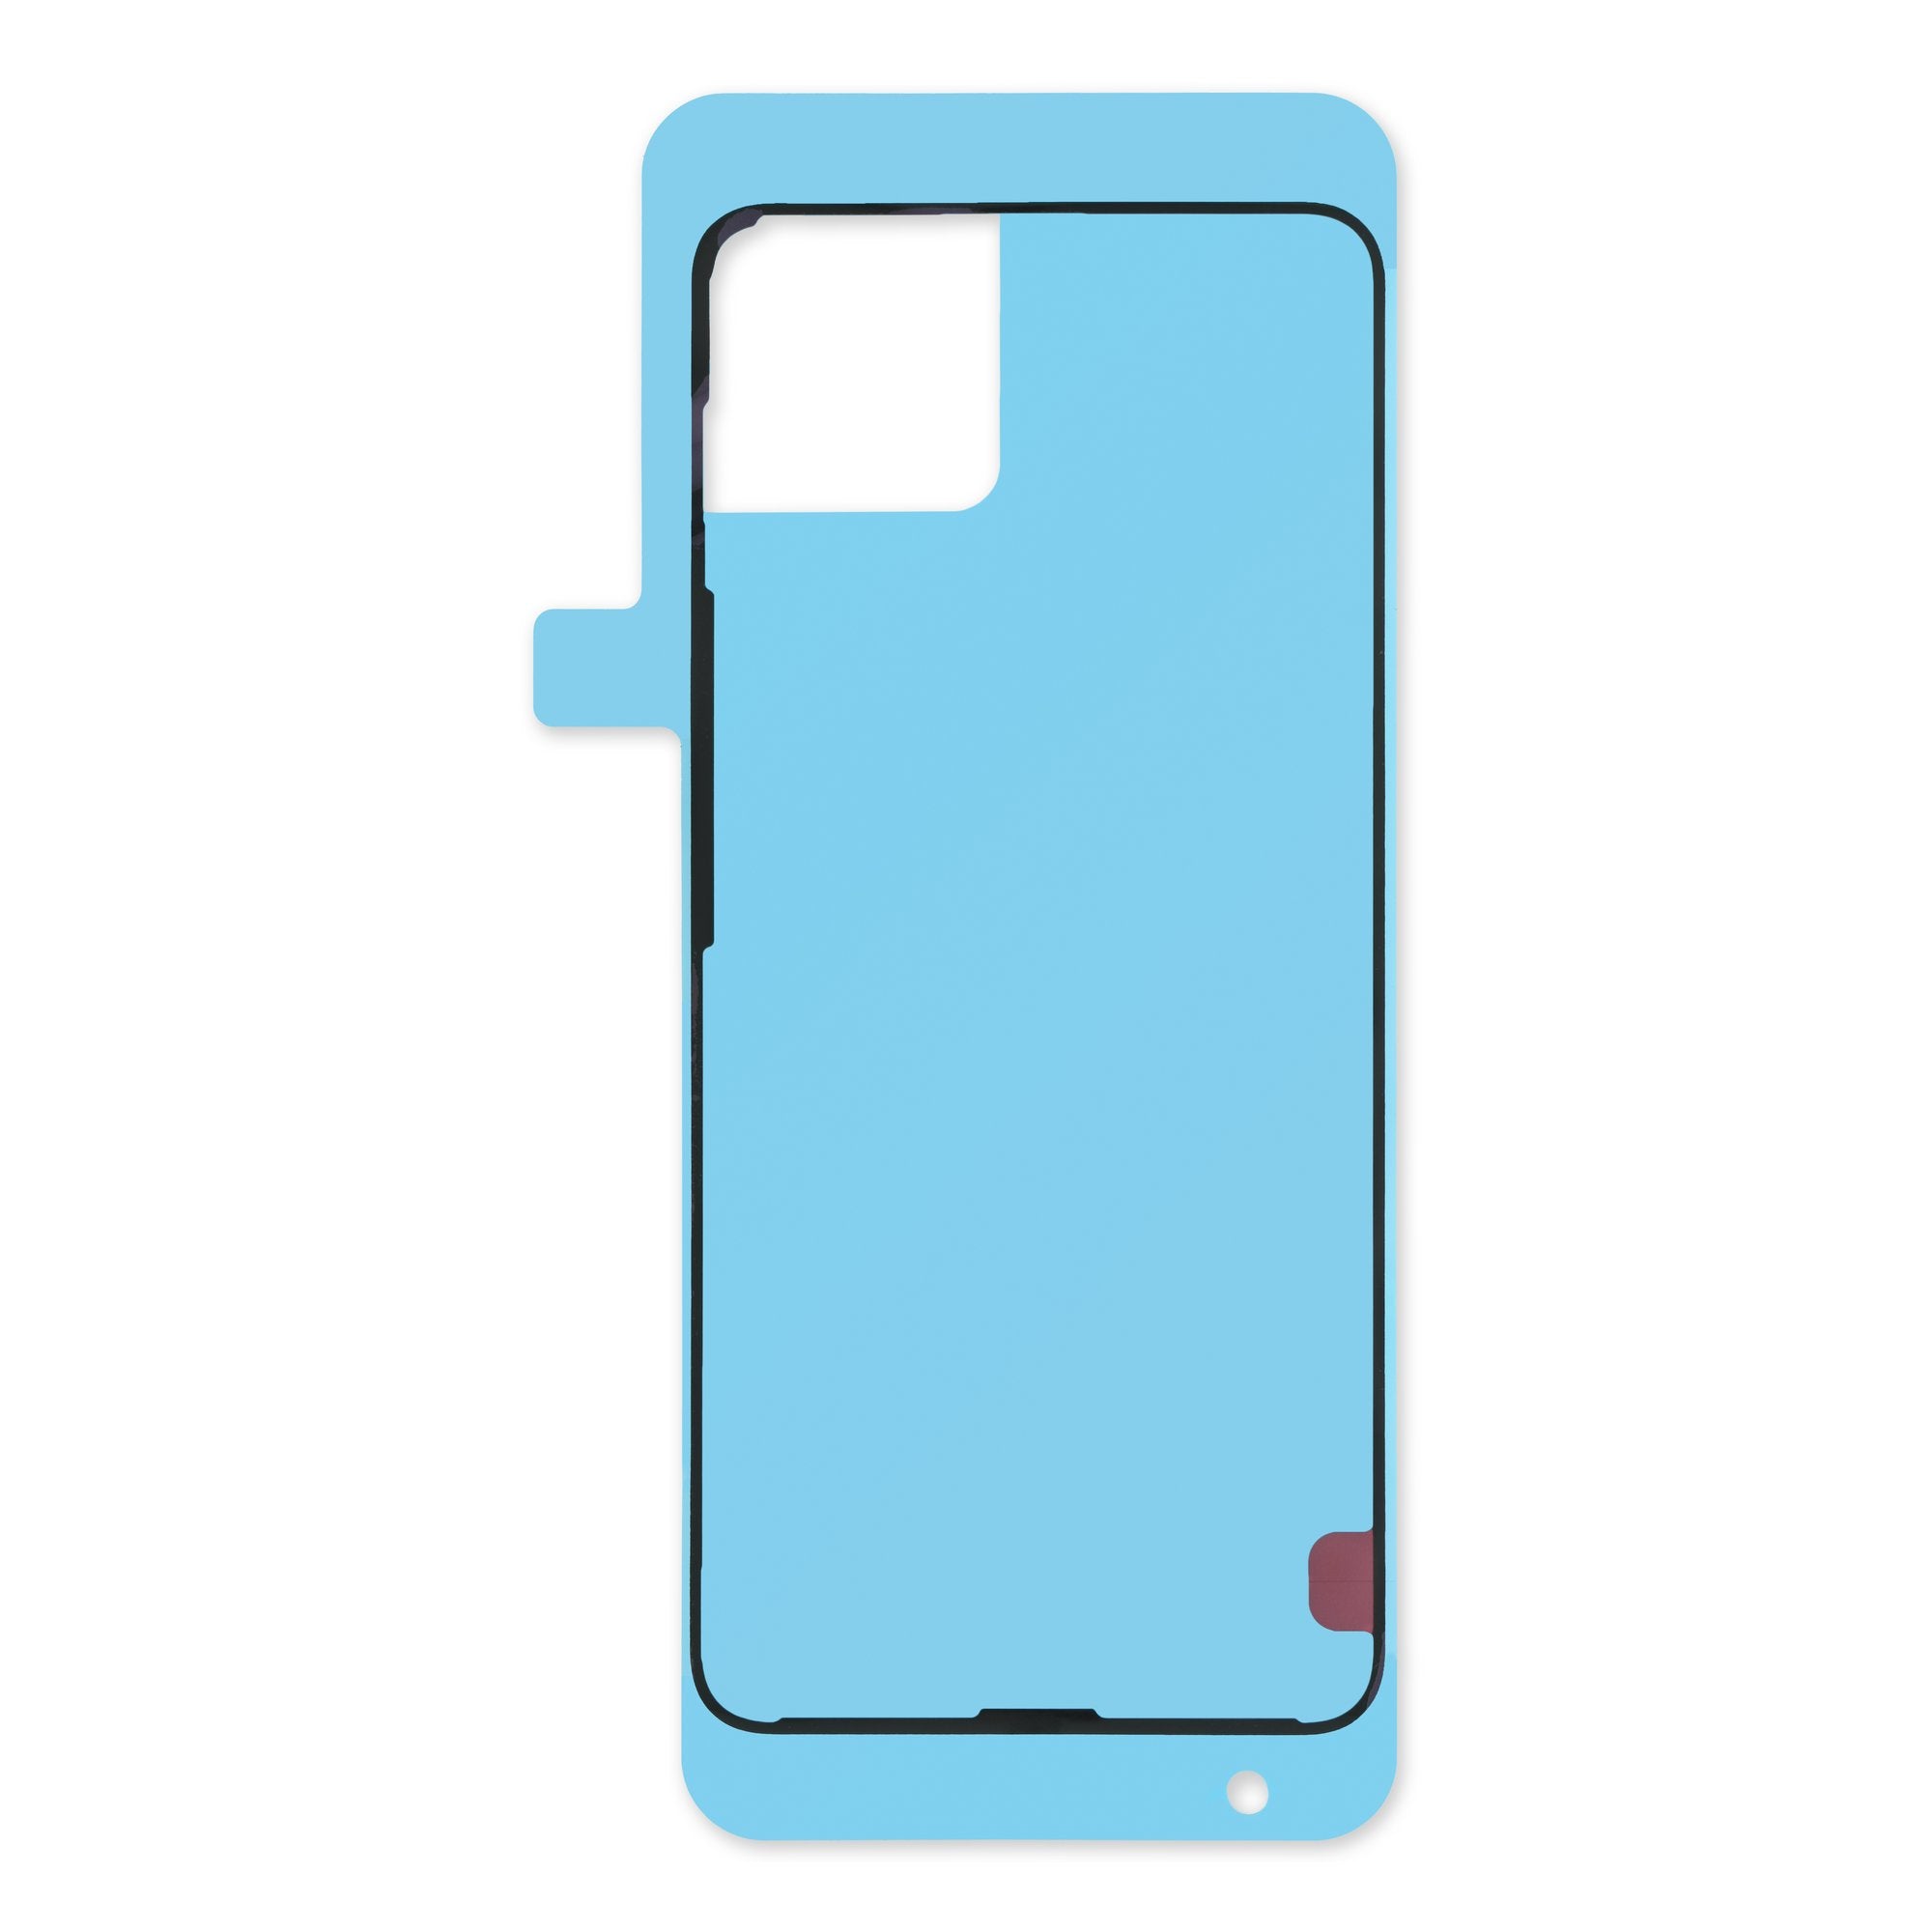 Google Pixel 4 XL Rear Cover Adhesive - Genuine New